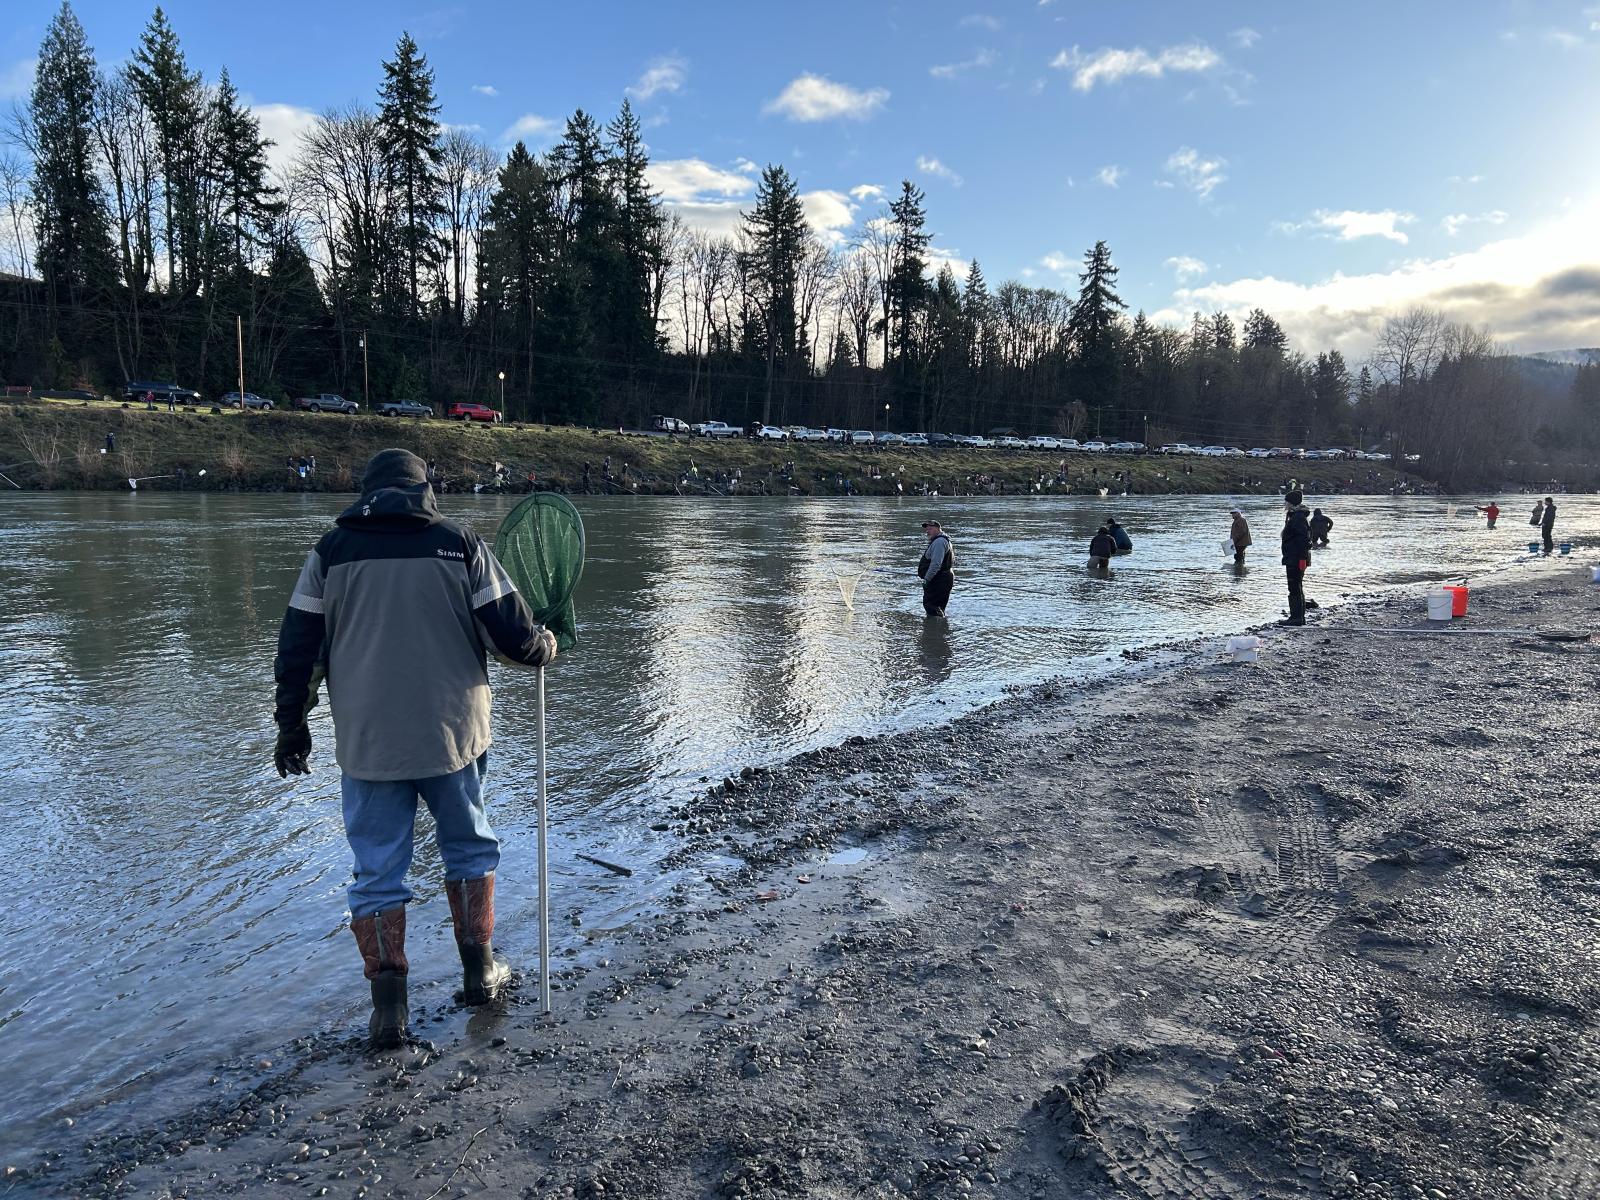 Smelt dip-net fishery on Cowlitz River opens this Saturday only, expect  lots of people